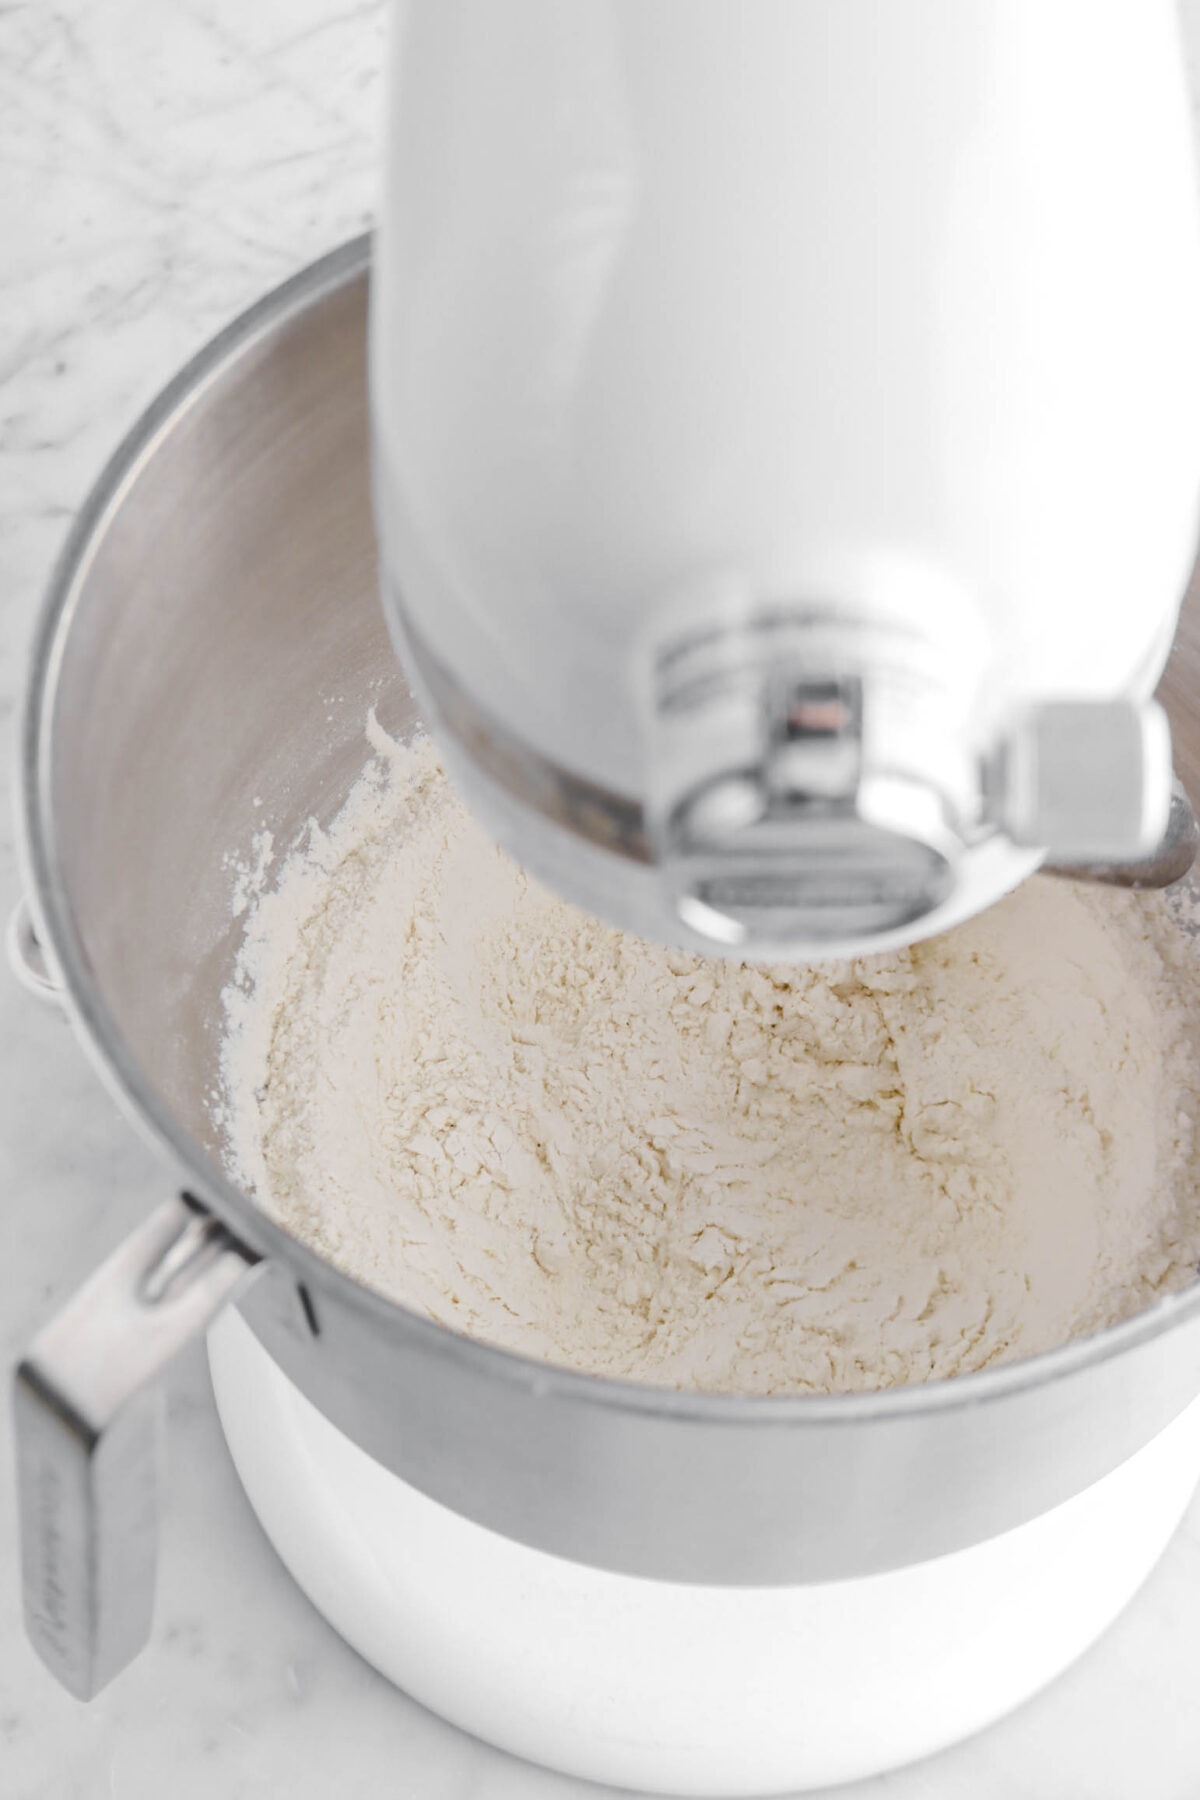 dry ingredients mixed together in mixer.